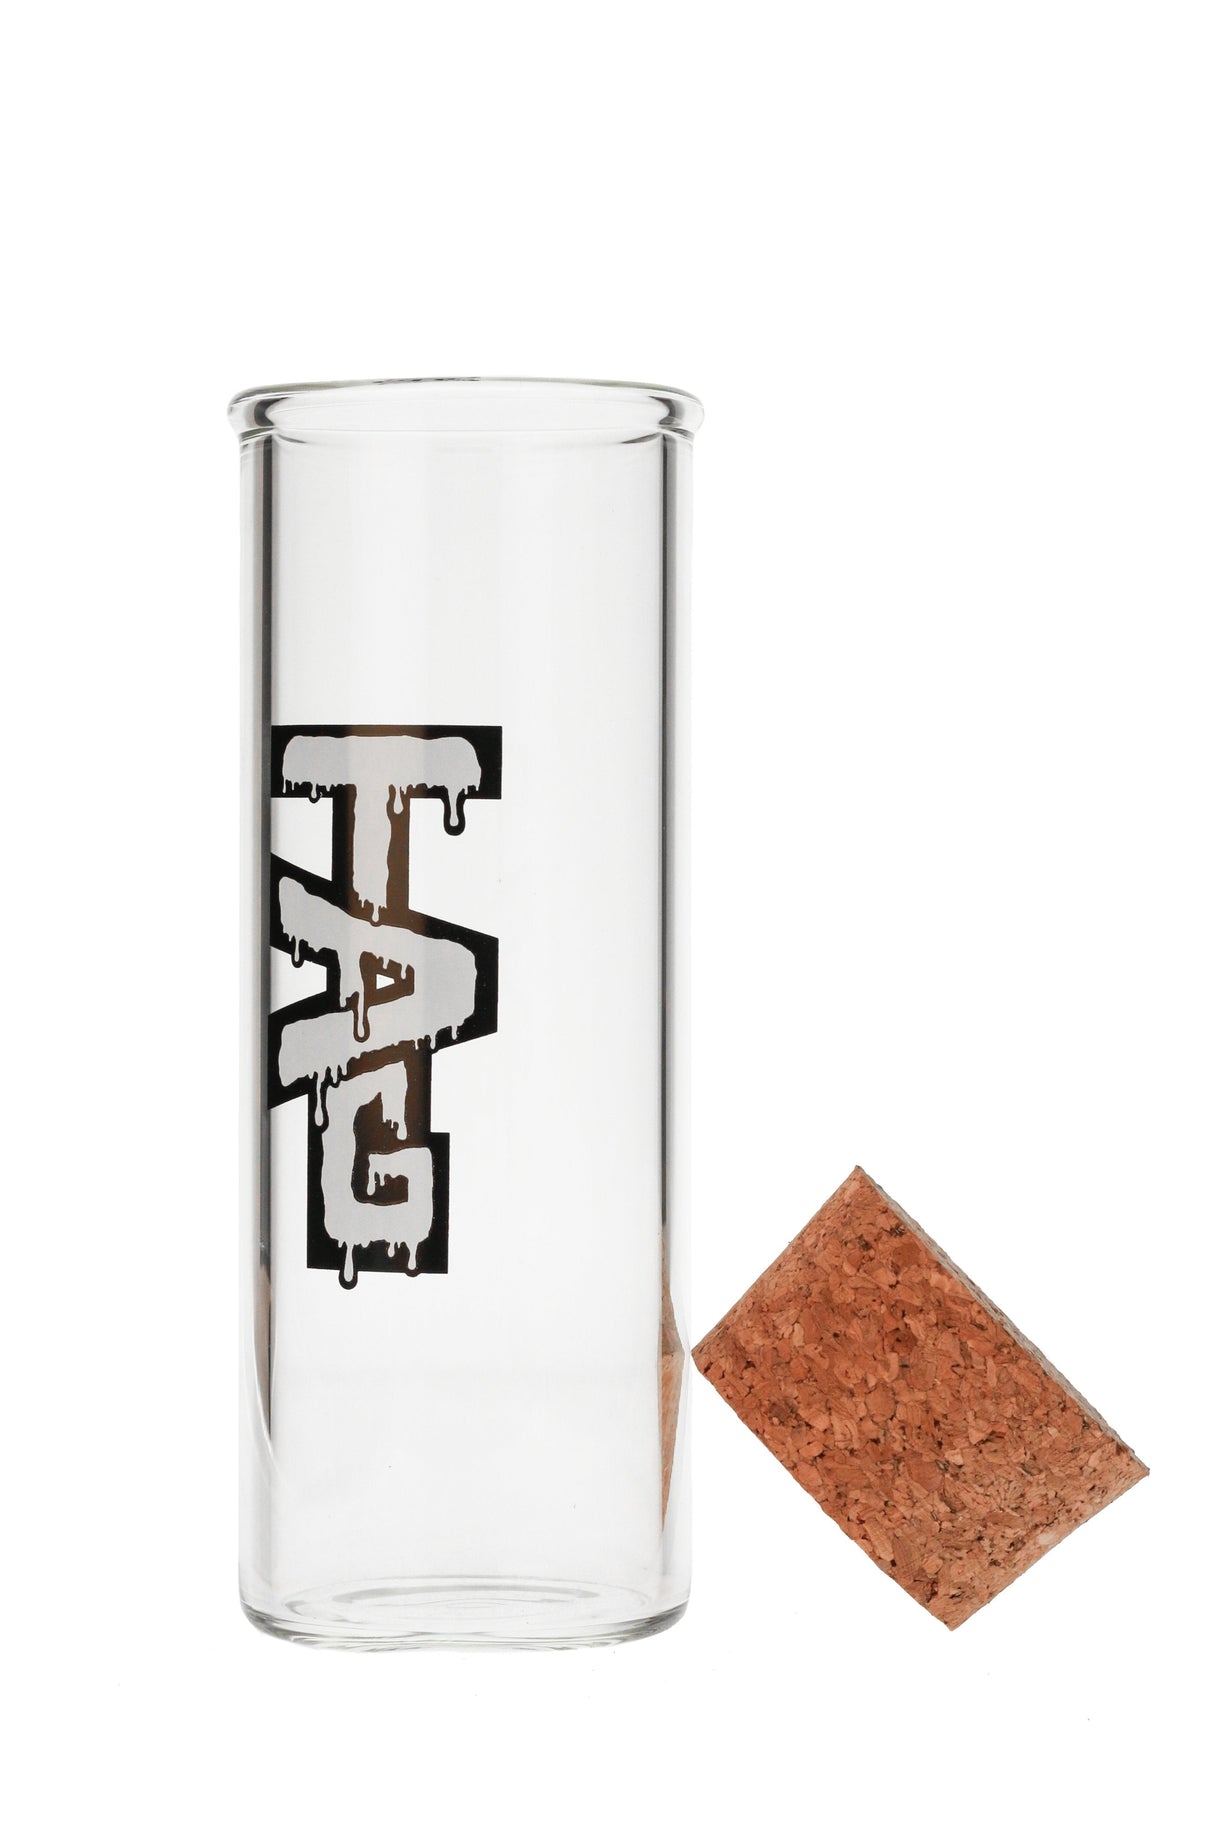 TAG - 8" Clear Glass Jar with Cork Top, 75x5MM, Front View on White Background